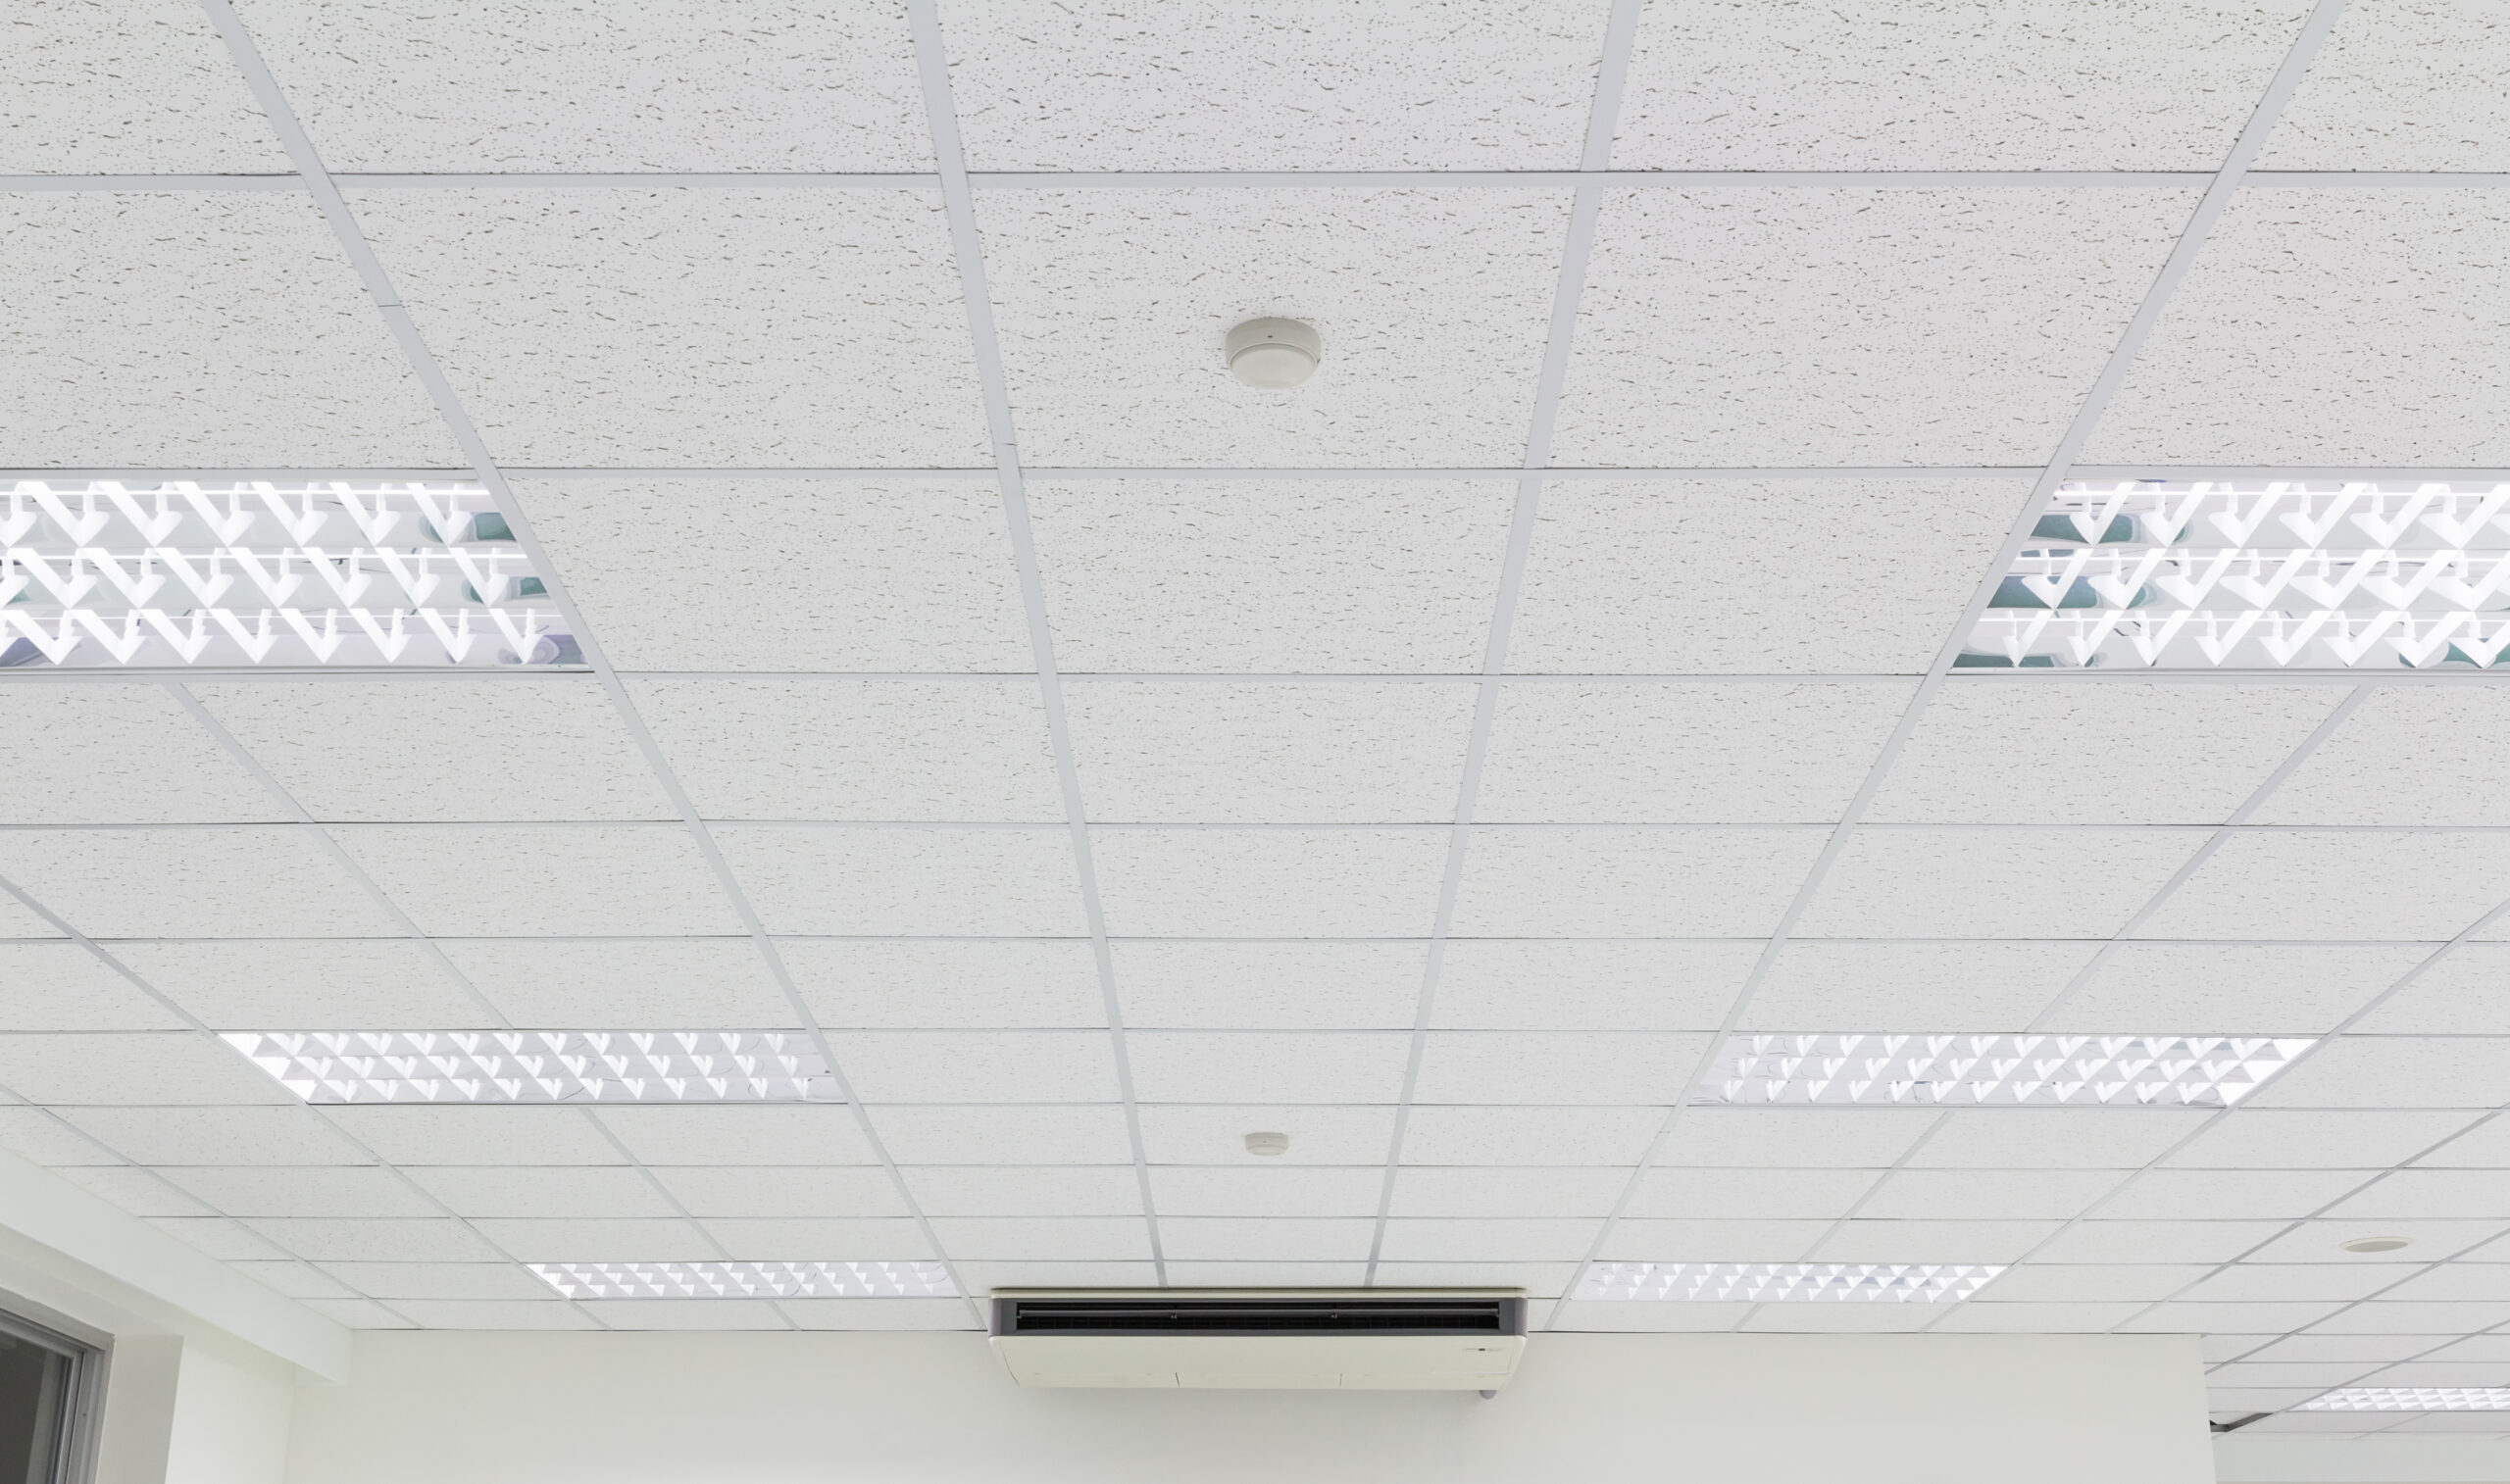 What are suspended ceilings?